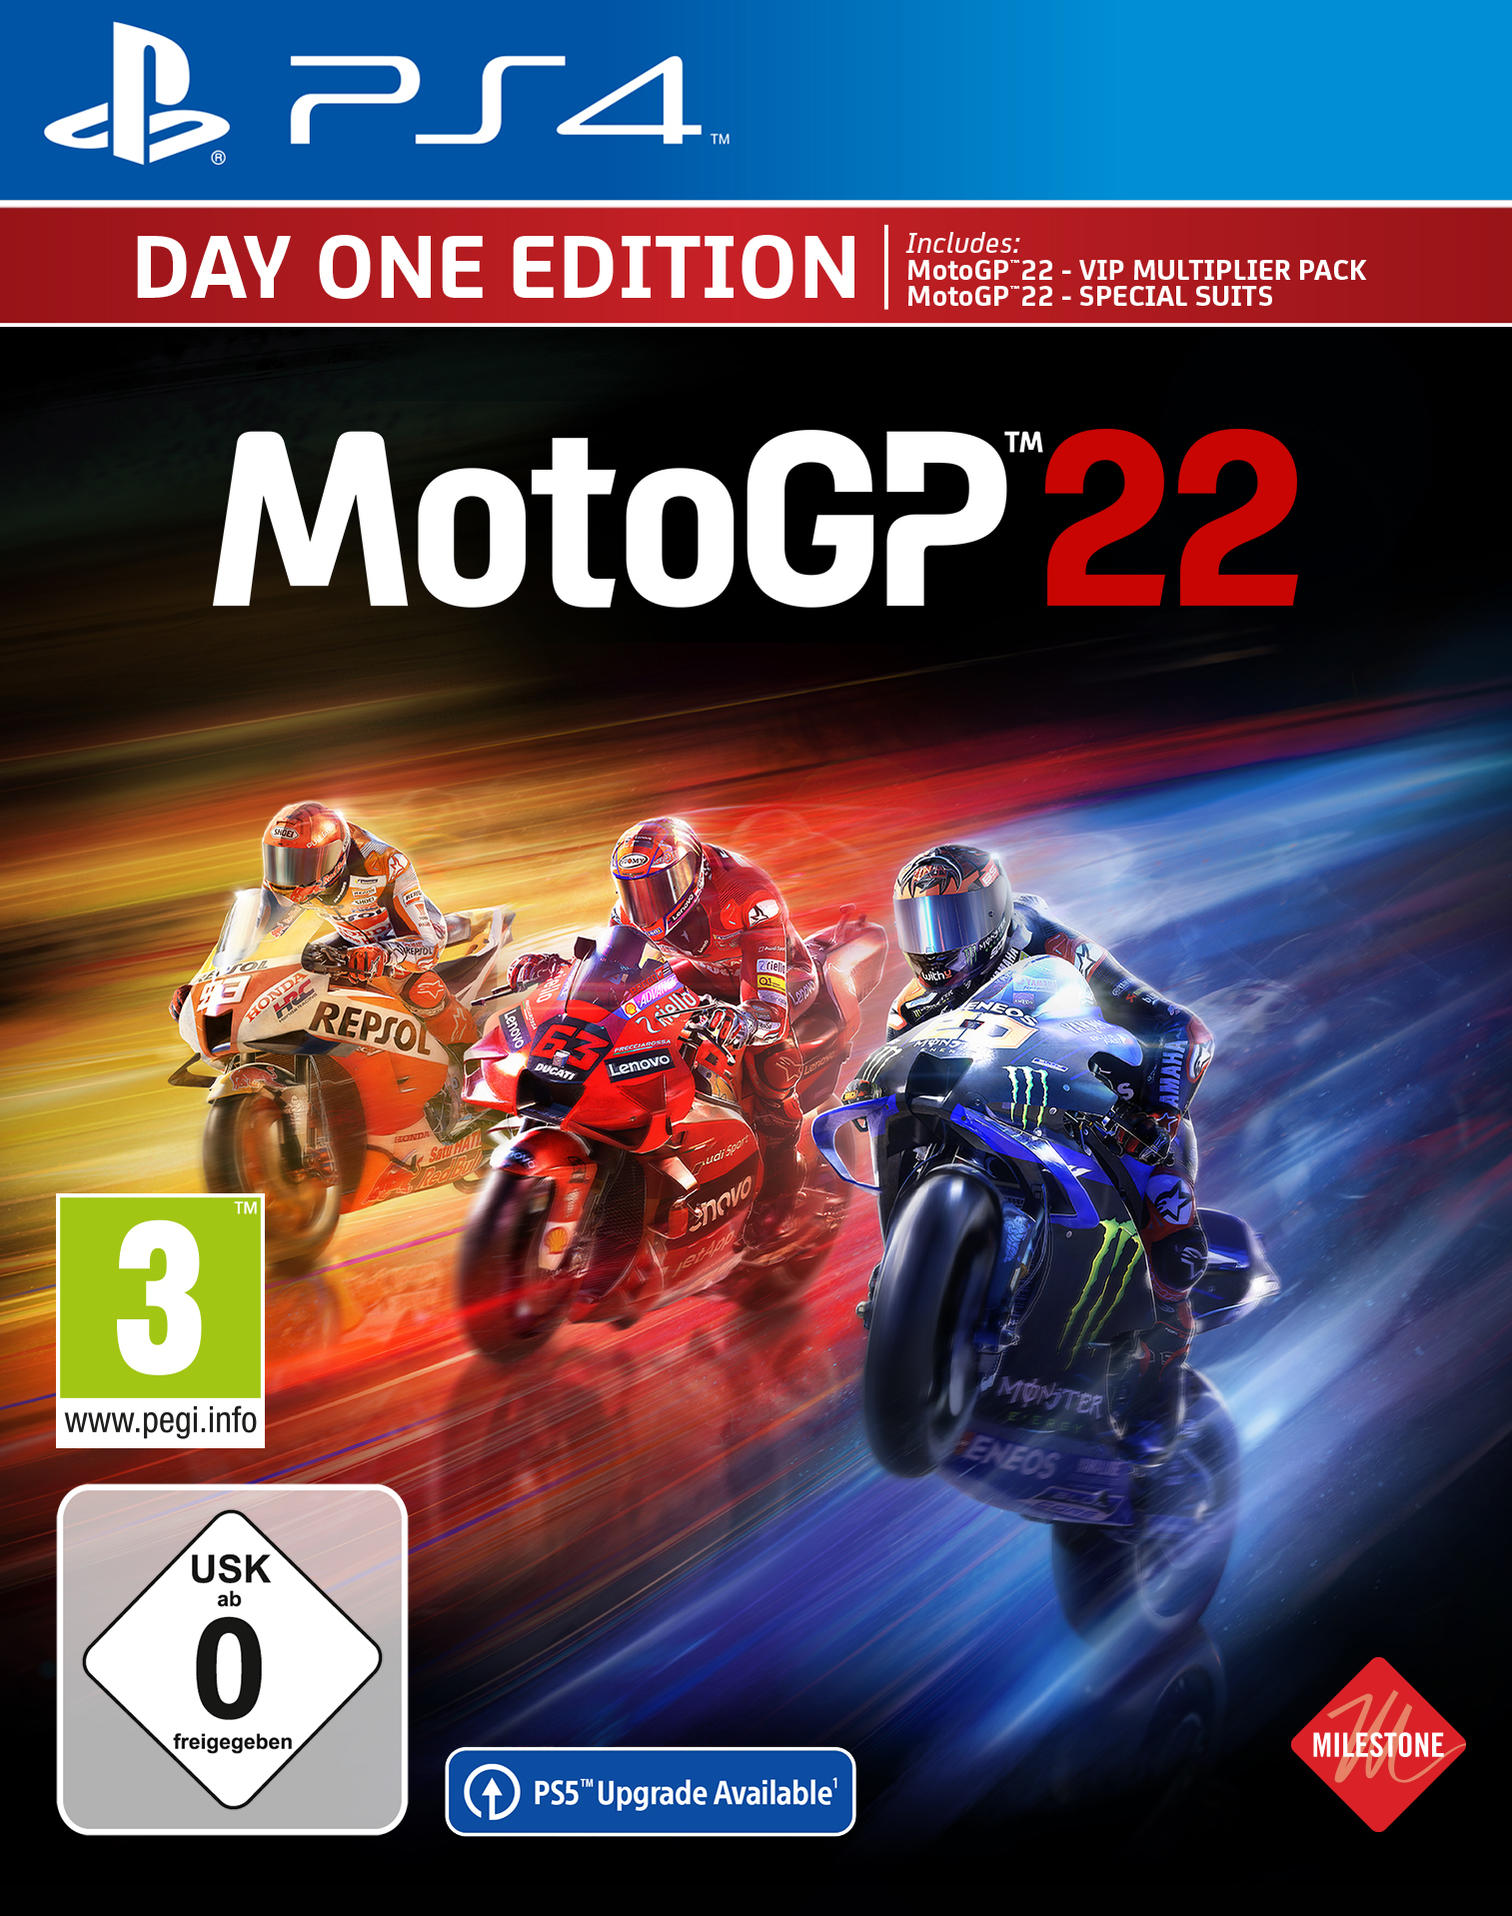 EDITION MOTOGP ONE 22 - [PlayStation DAY PS4 4]